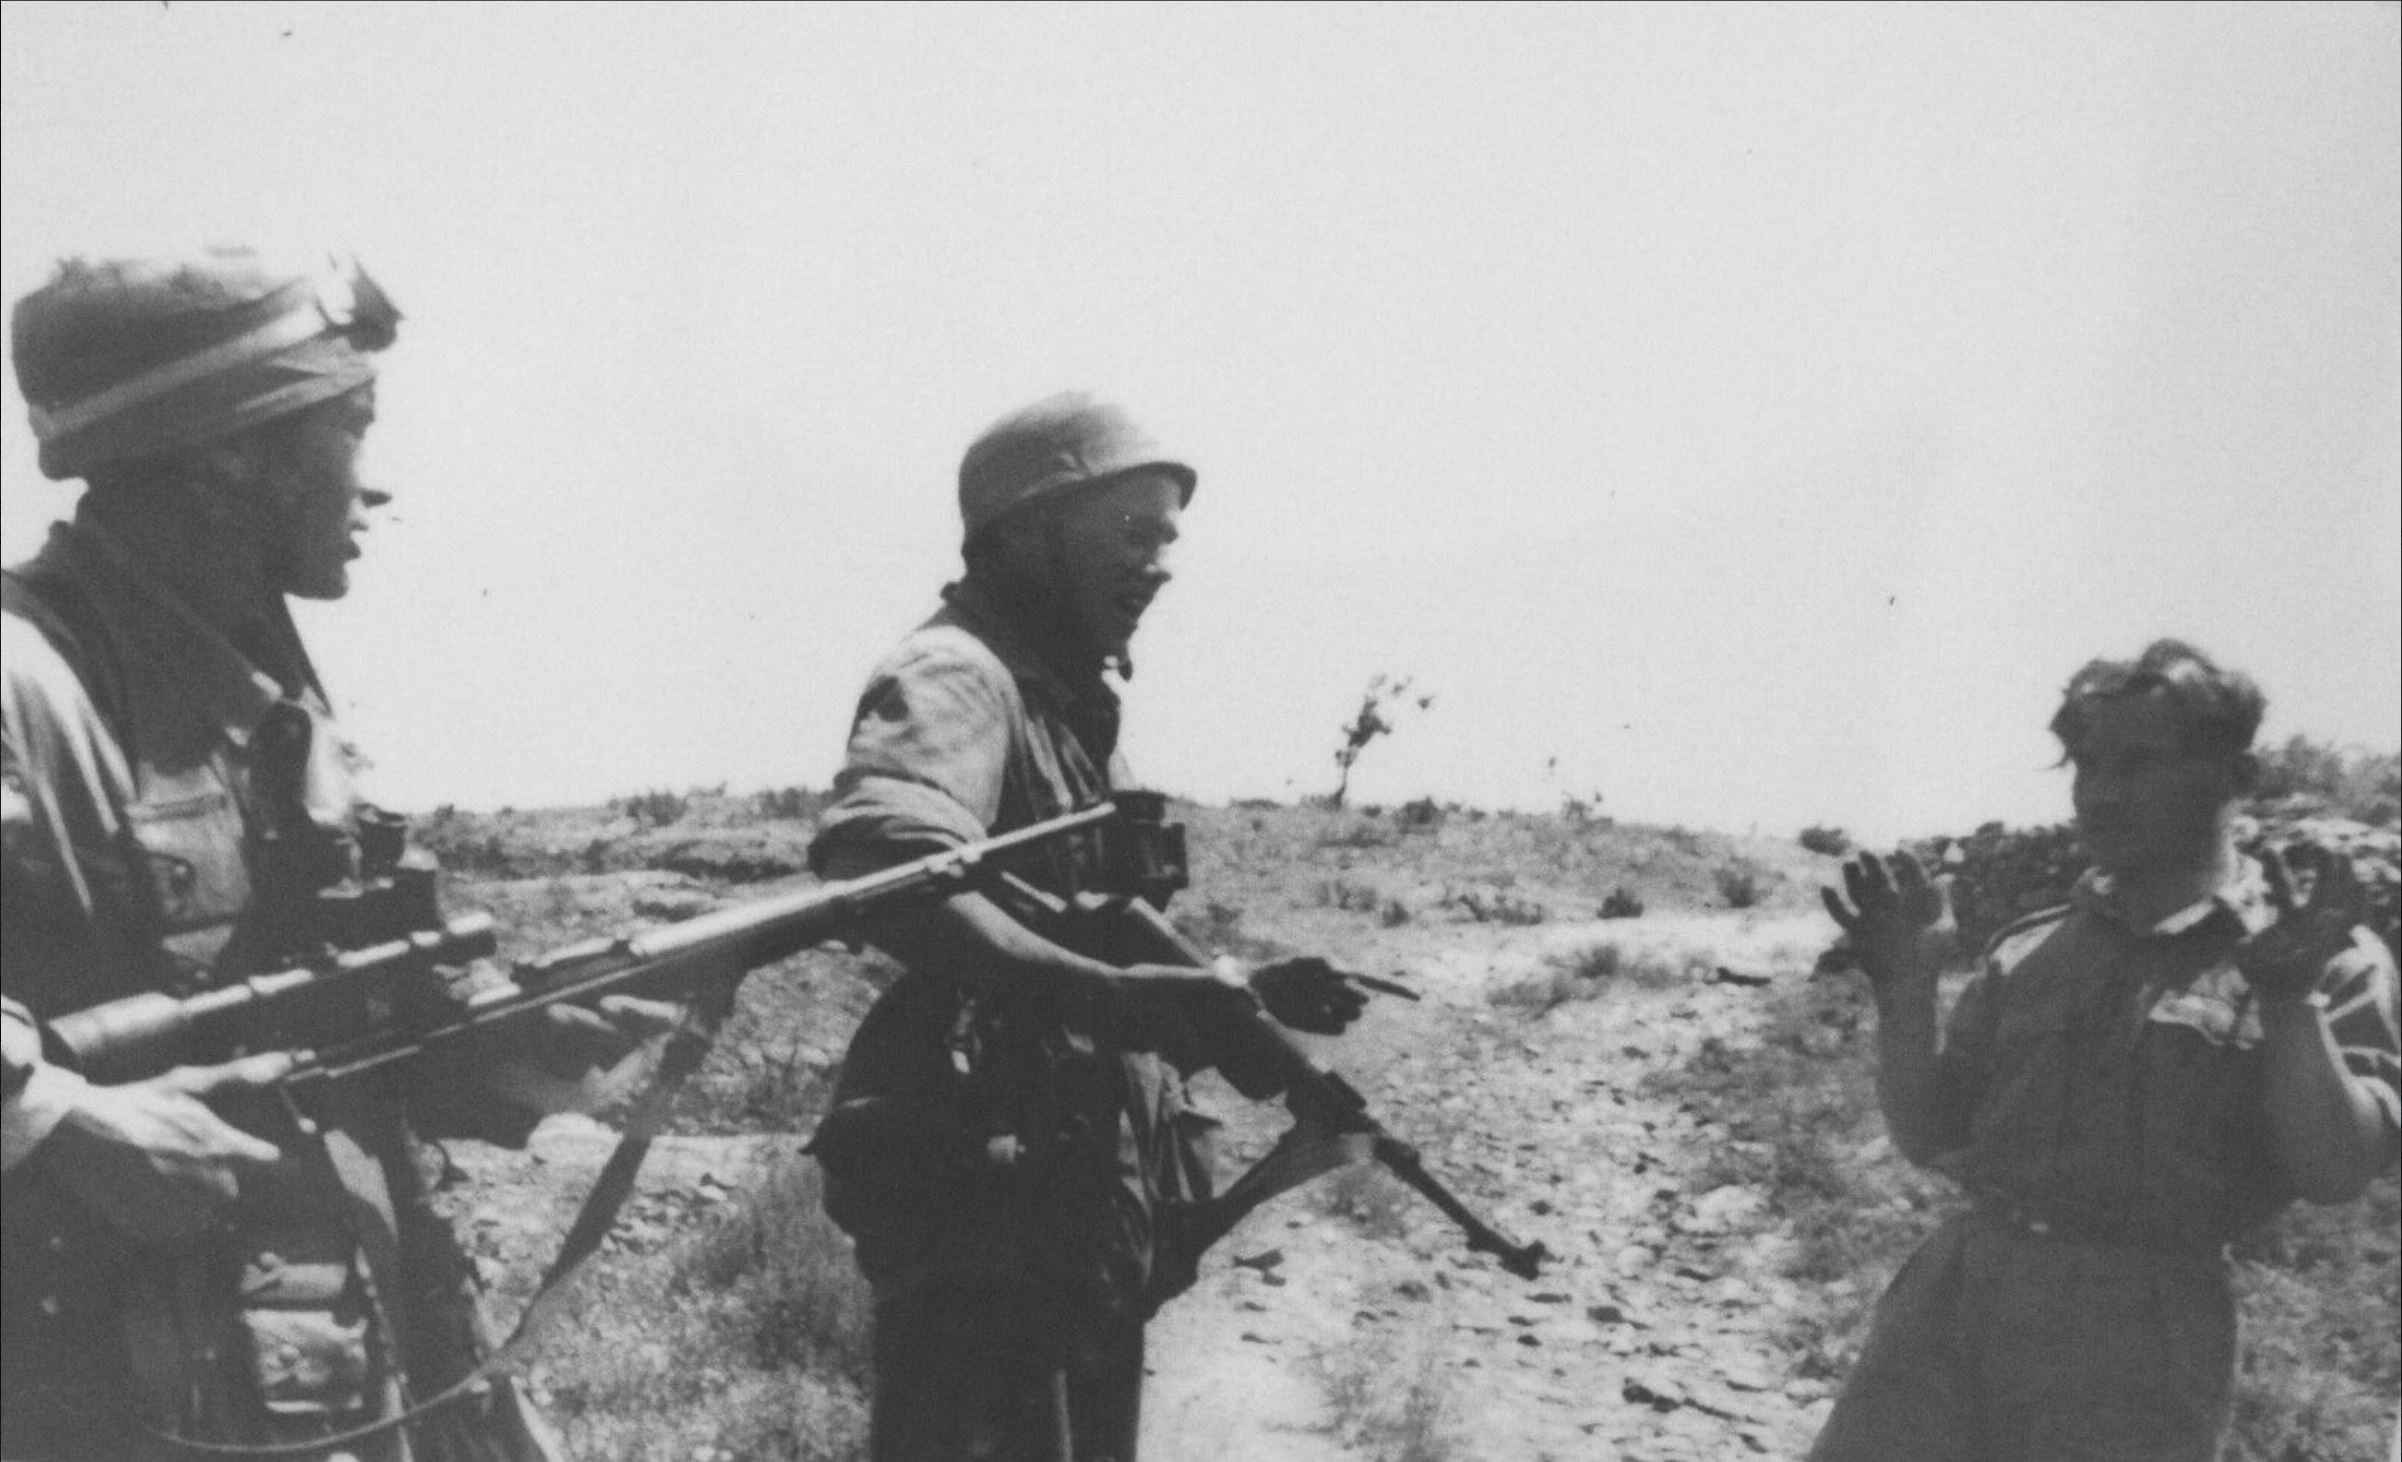 German paratroopers capturing British soldiers during the Battle for Crete May 1941 ebay 03